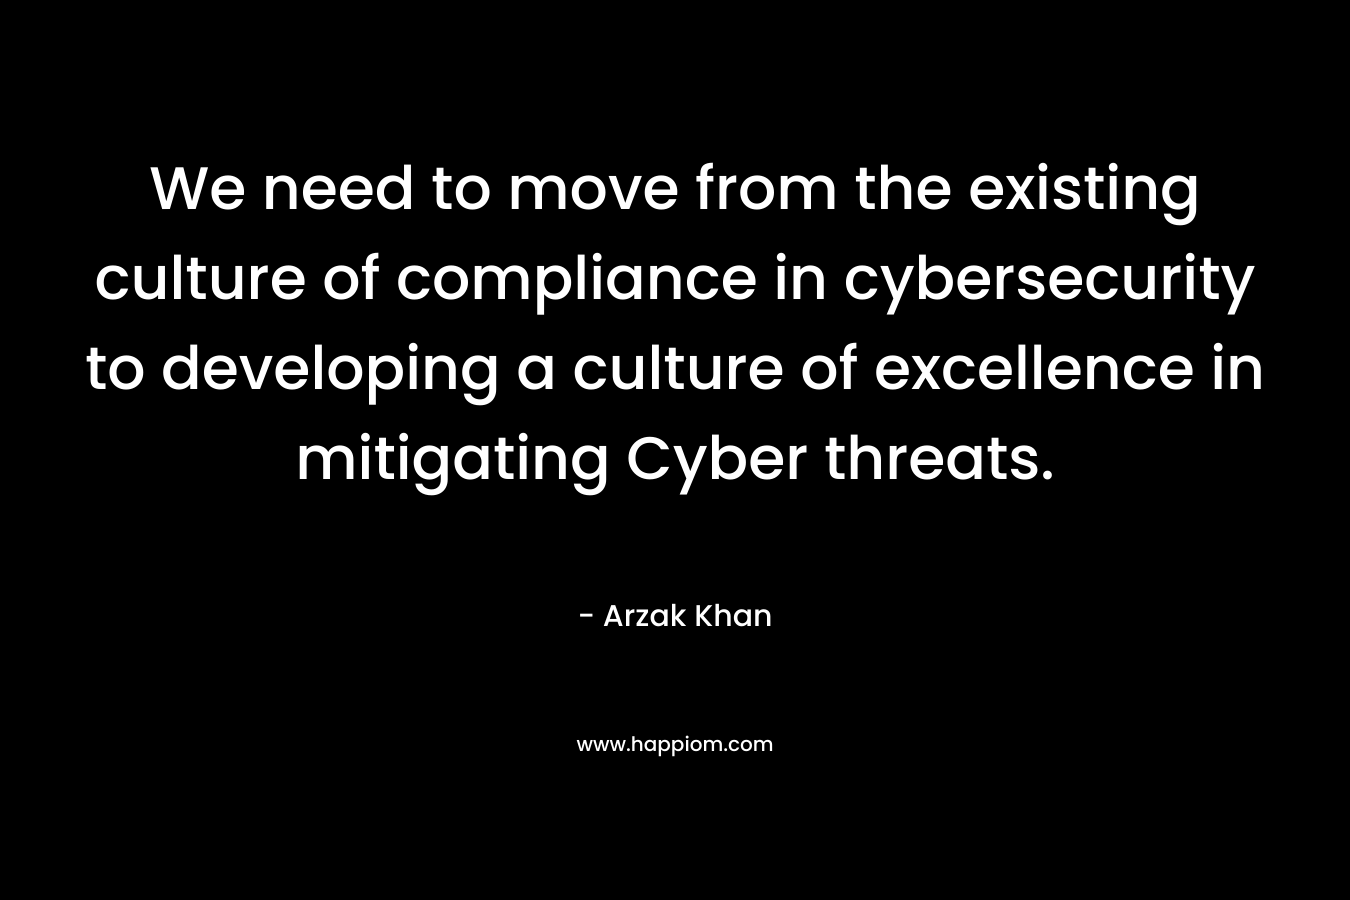 We need to move from the existing culture of compliance in cybersecurity to developing a culture of excellence in mitigating Cyber threats. – Arzak Khan